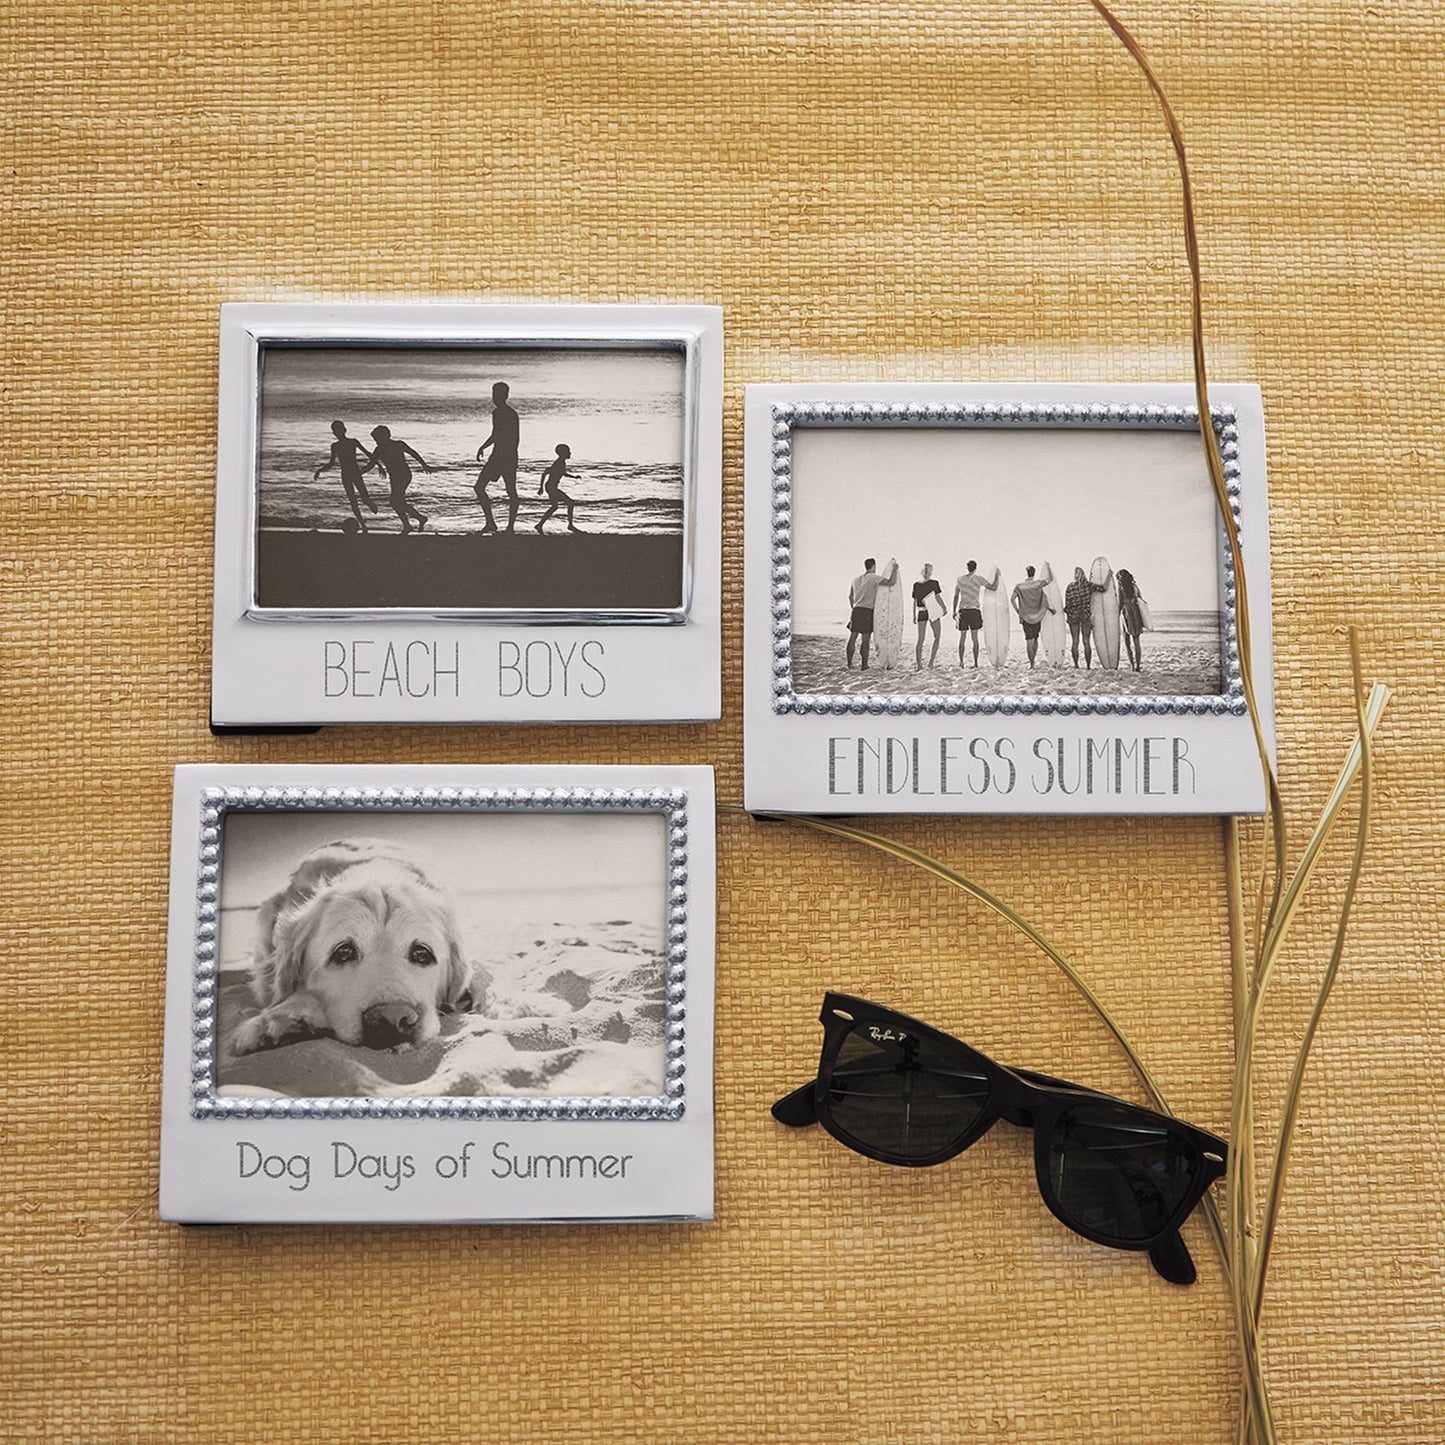 Dog Days of Summer Silver Picture Frame